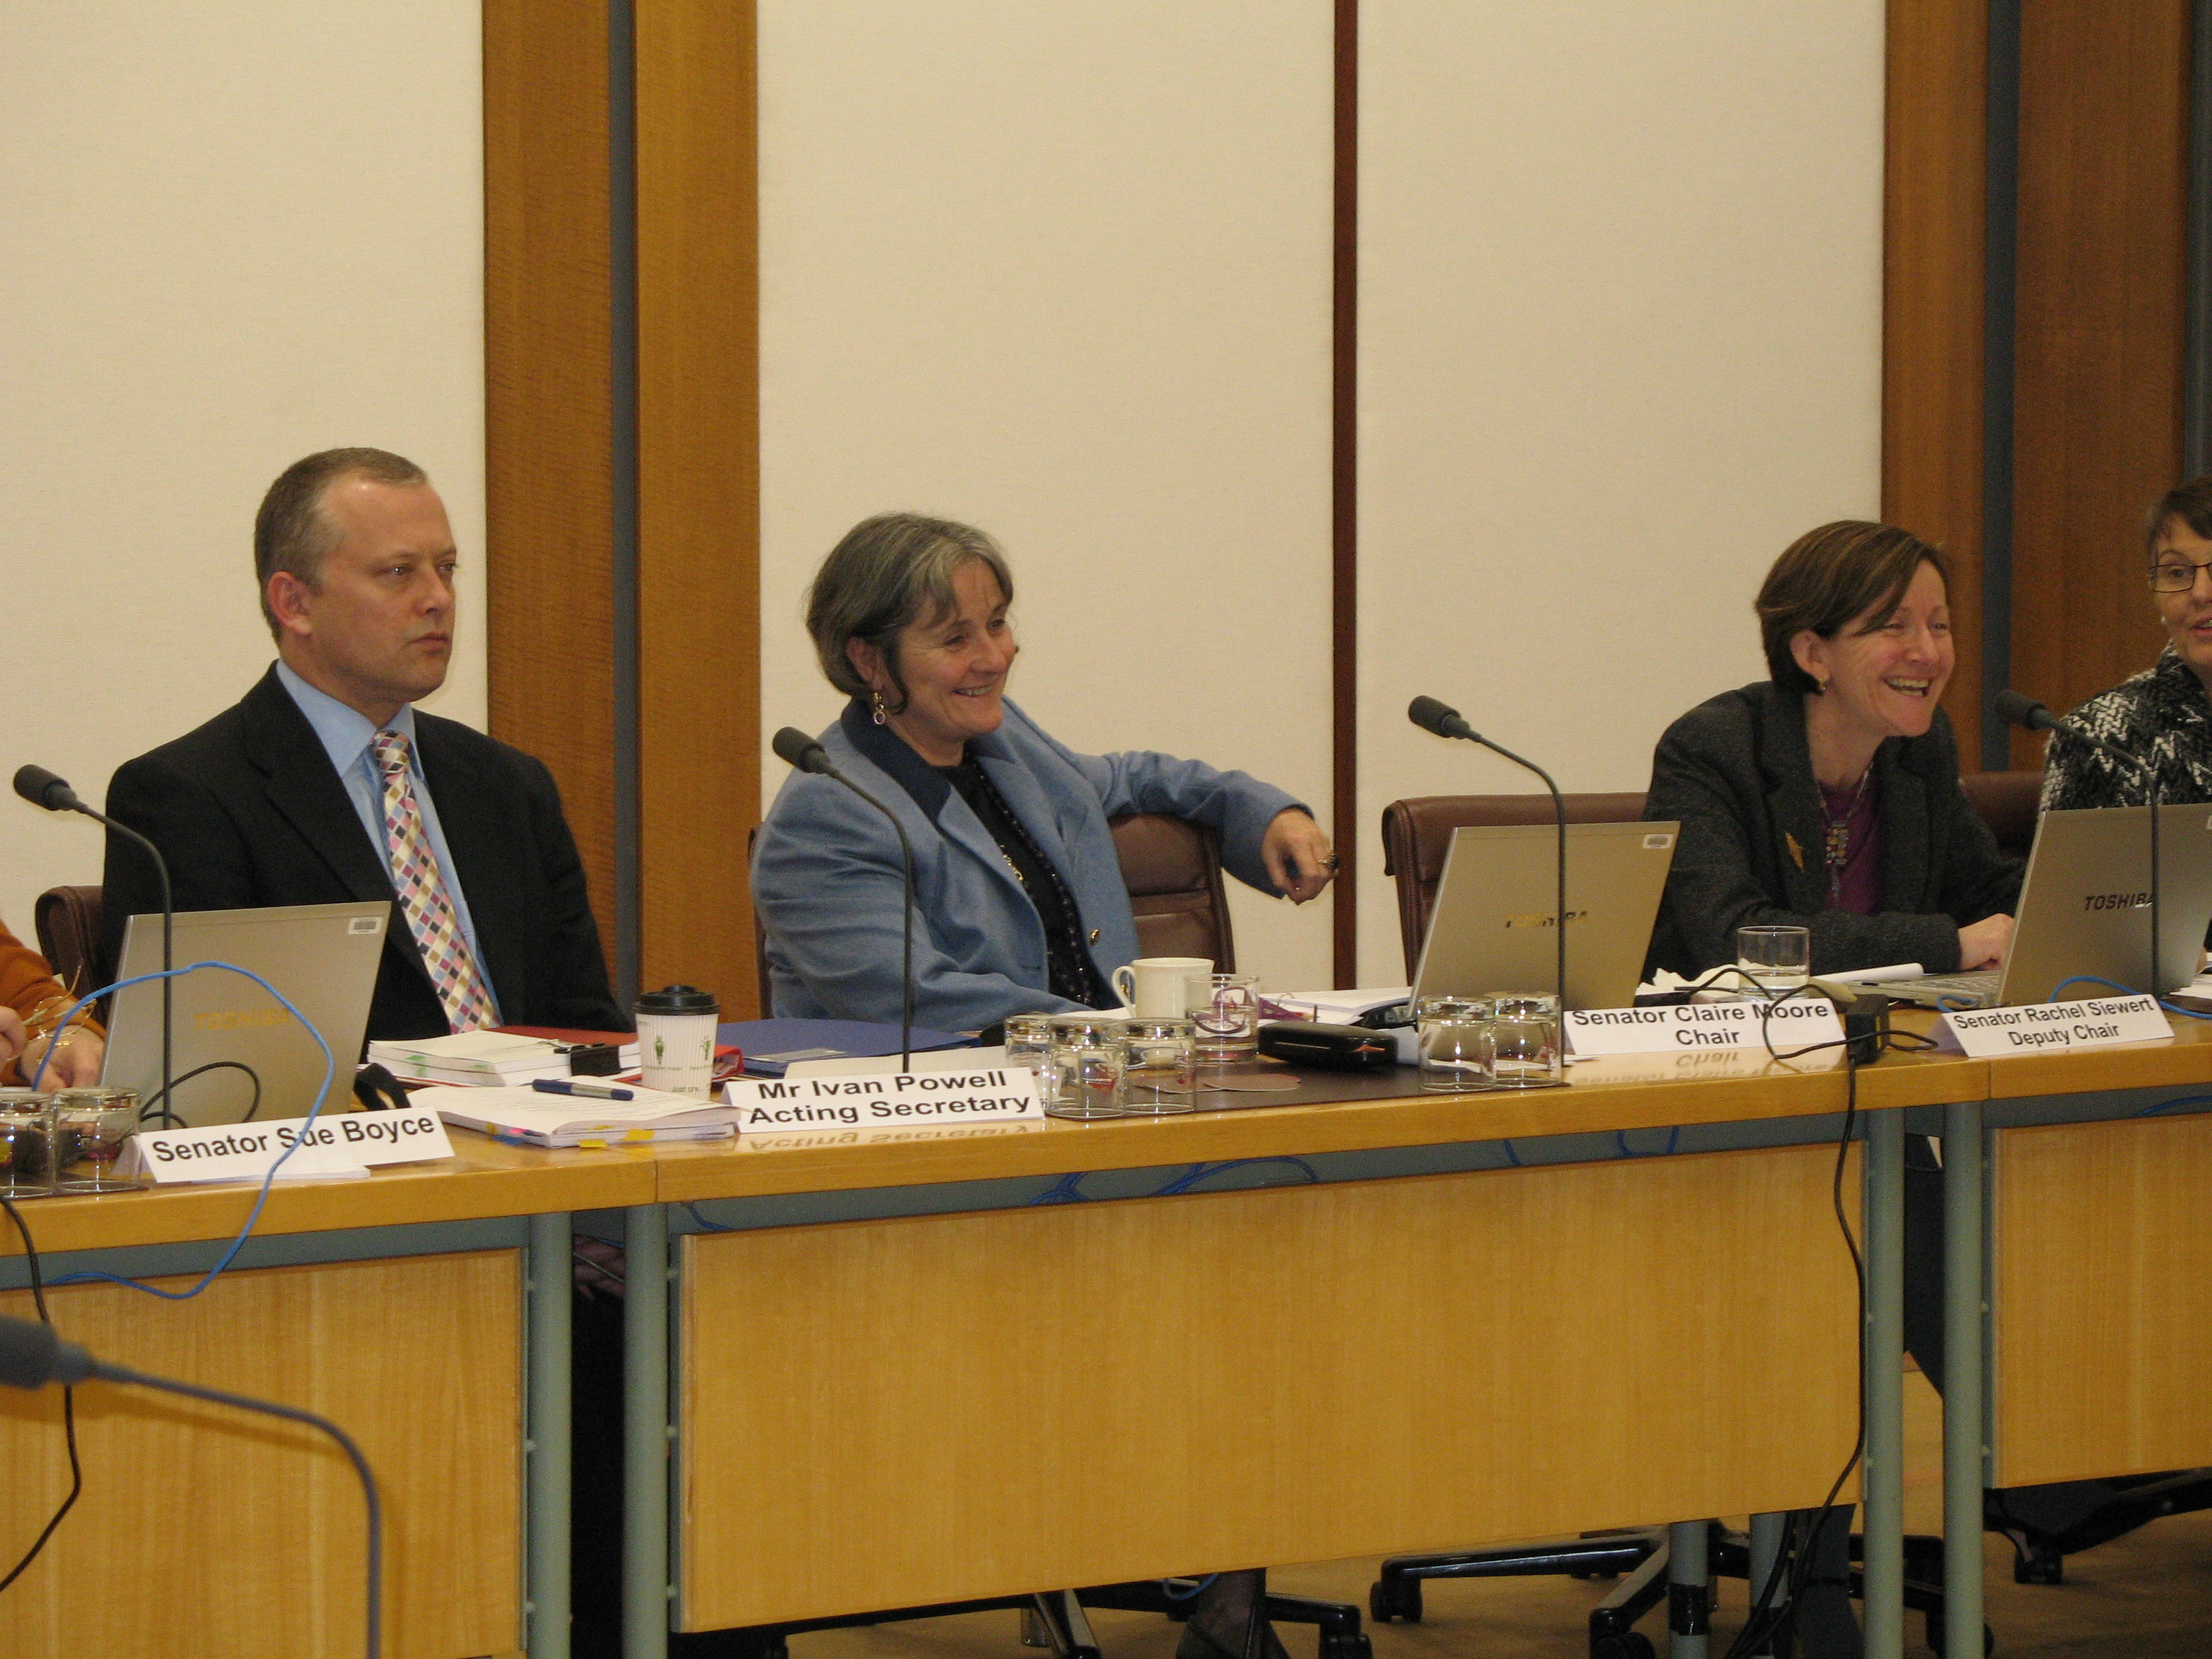 Community Affairs Legislation Committee hearing evidence from witnesses, 6 August 2009. L-R: Ivan Powell [Acting Secretary], Senators Claire Moore [Chair] and Rachel Siewert [Deputy Chair]. DPS Auspic.